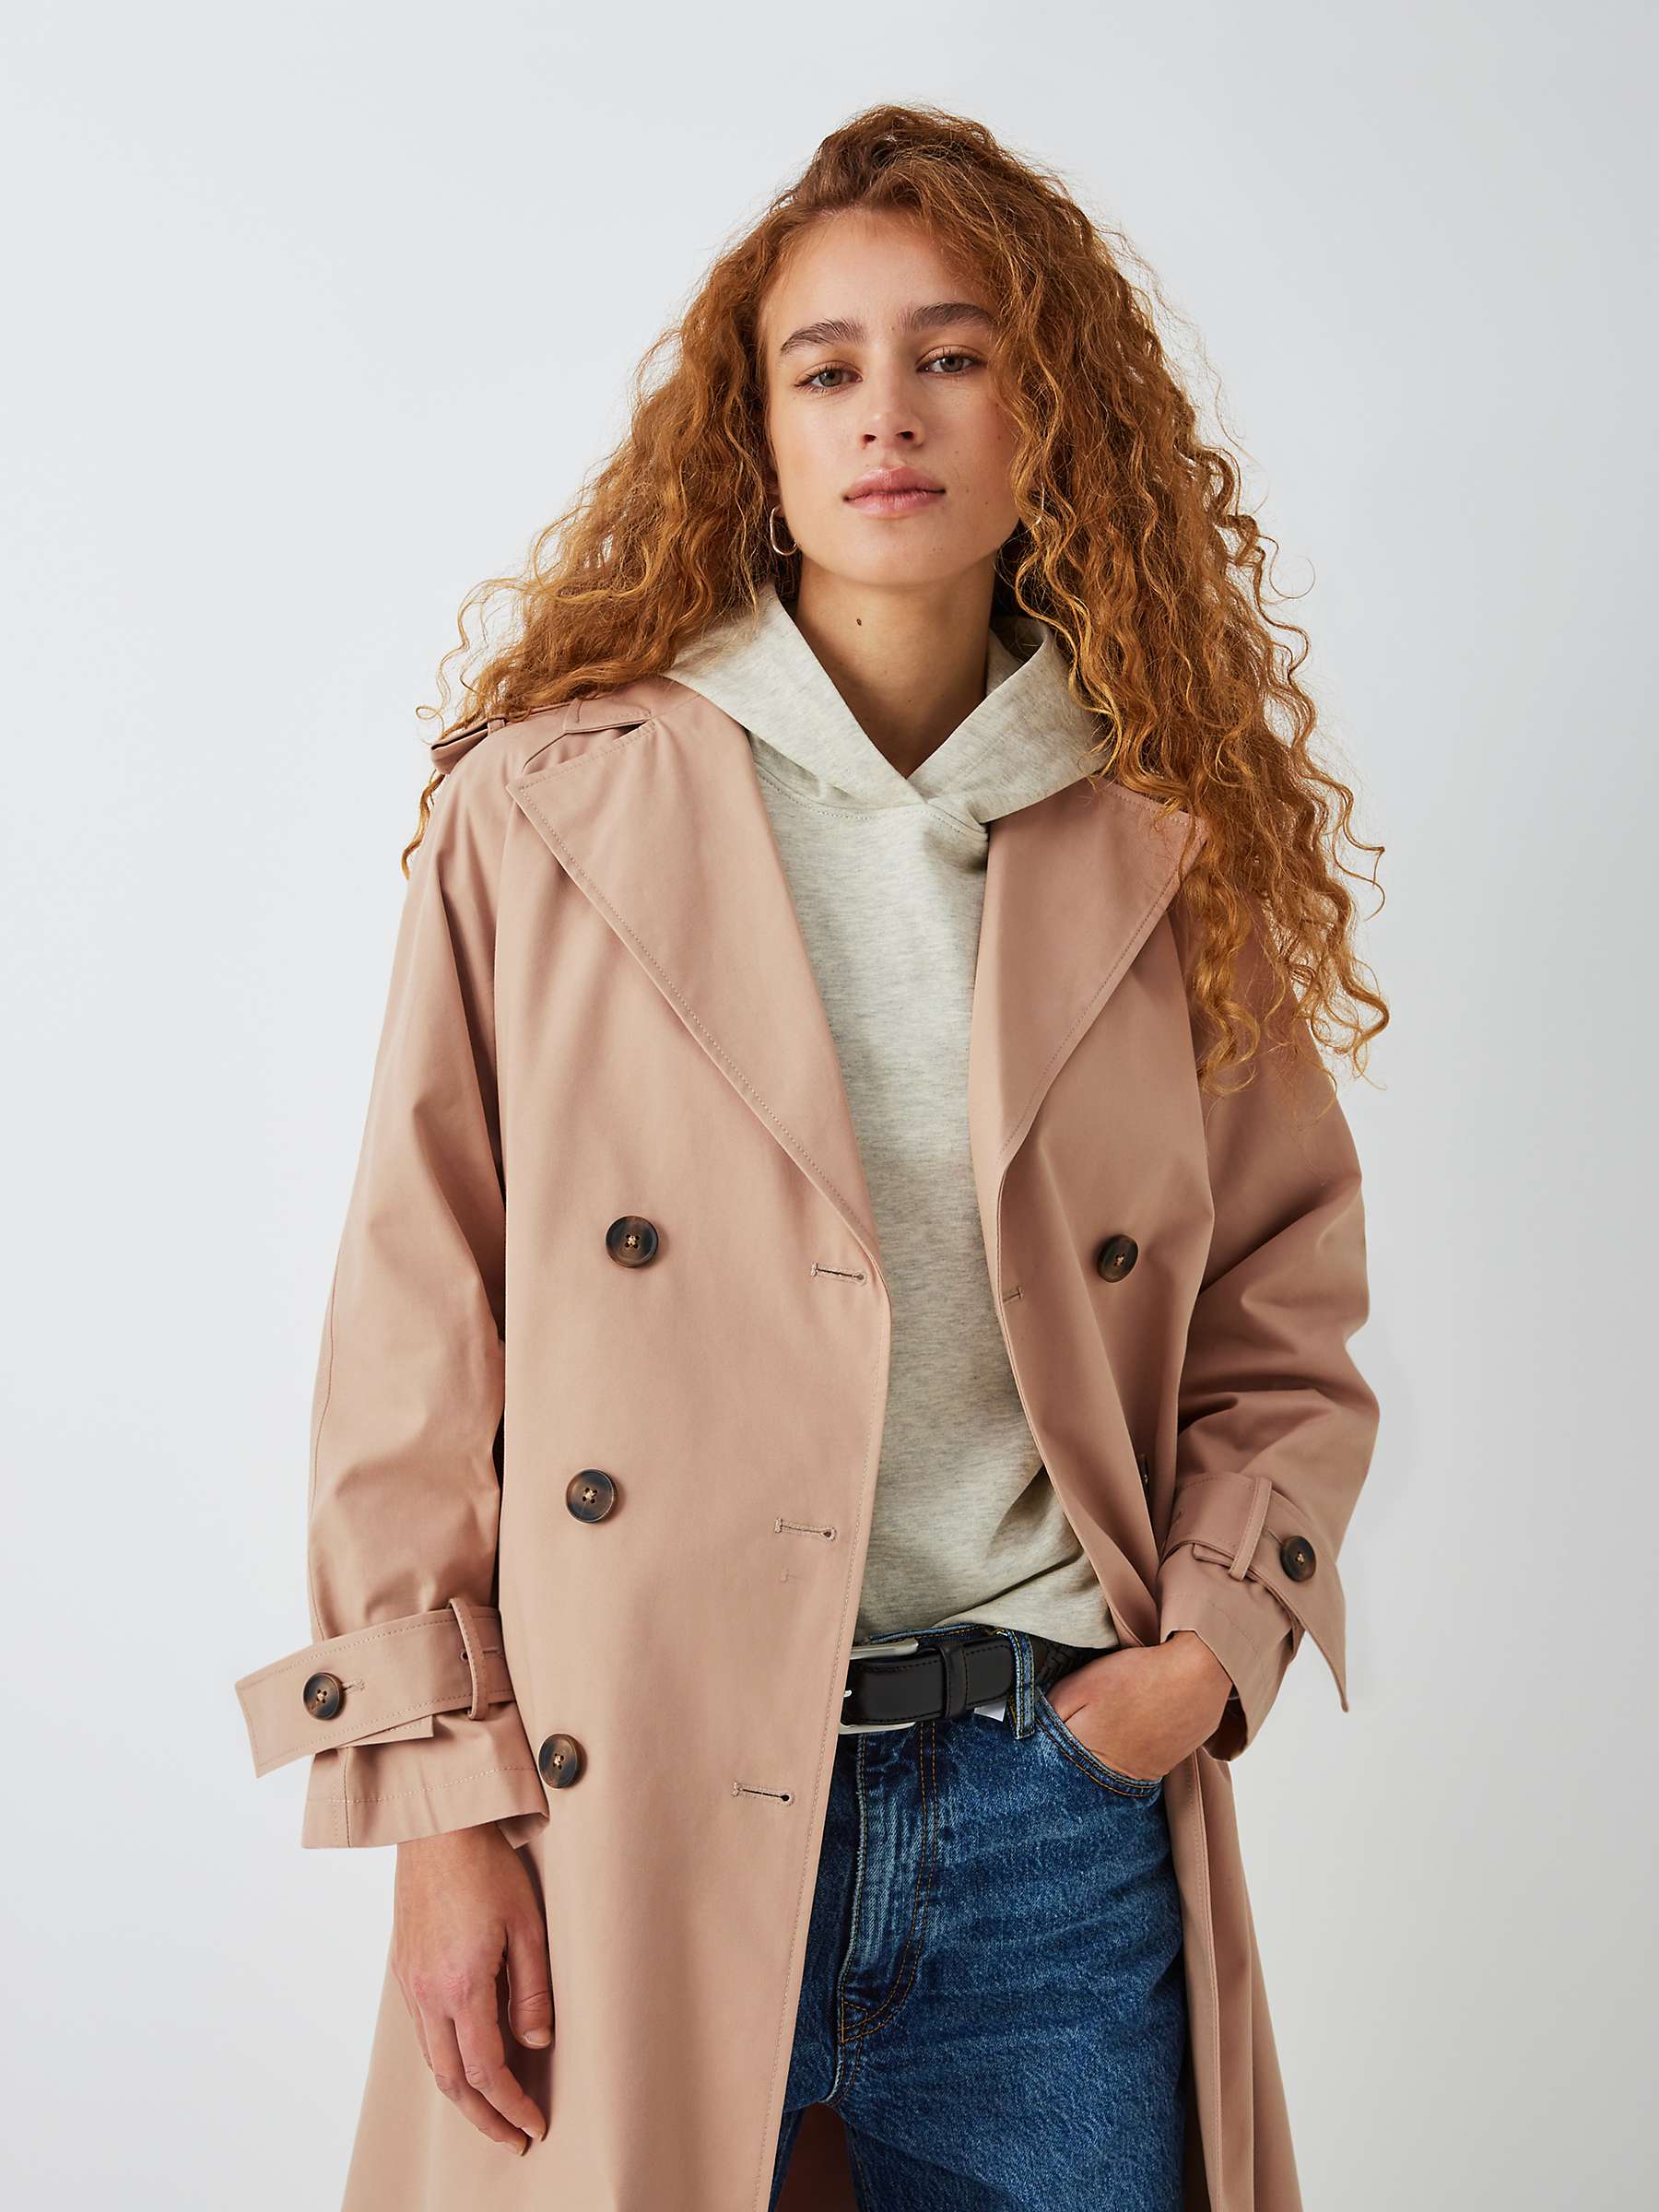 Buy John Lewis ANYDAY Longline Trench Coat Online at johnlewis.com